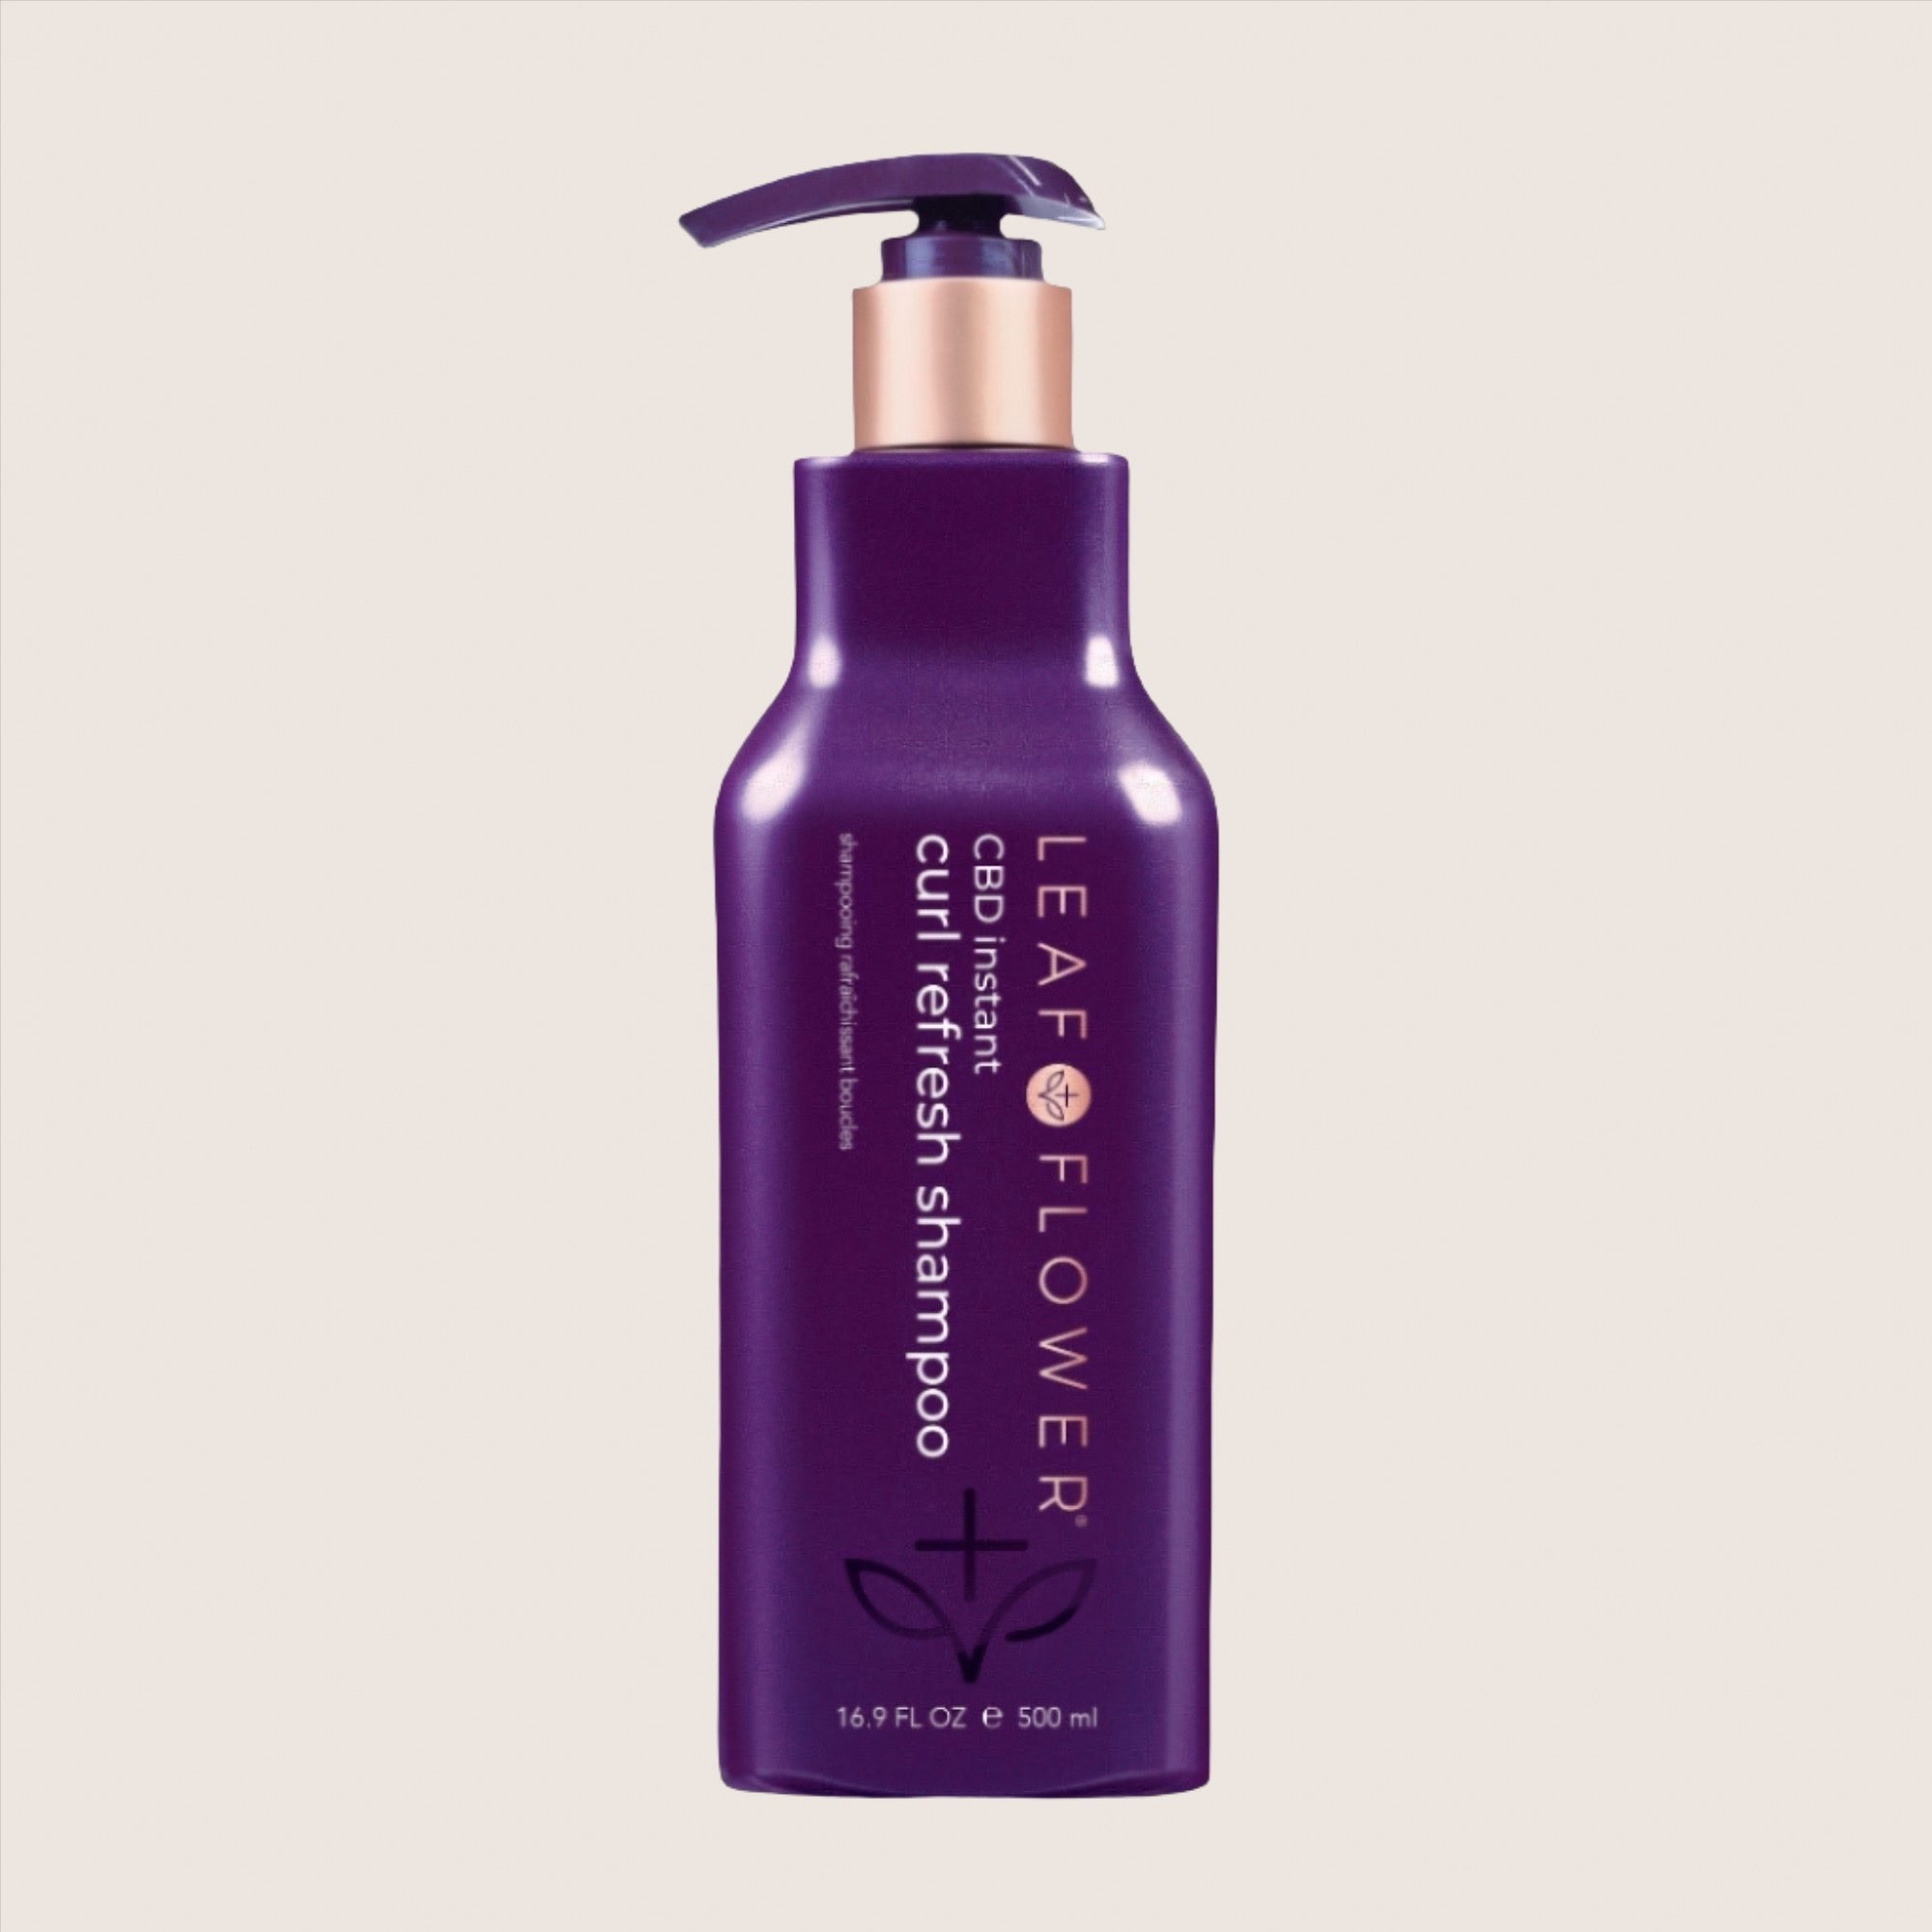 A purple bottle of Leaf and Flower Instant Curl Refresh Shampoo with a pump top, labeled "Leaf and Flower Instant Curl Refresh Shampoo," 16.9 FL OZ (500 ml). This color-safe formula gently removes build-up, leaving your curls hydrated and refreshed.